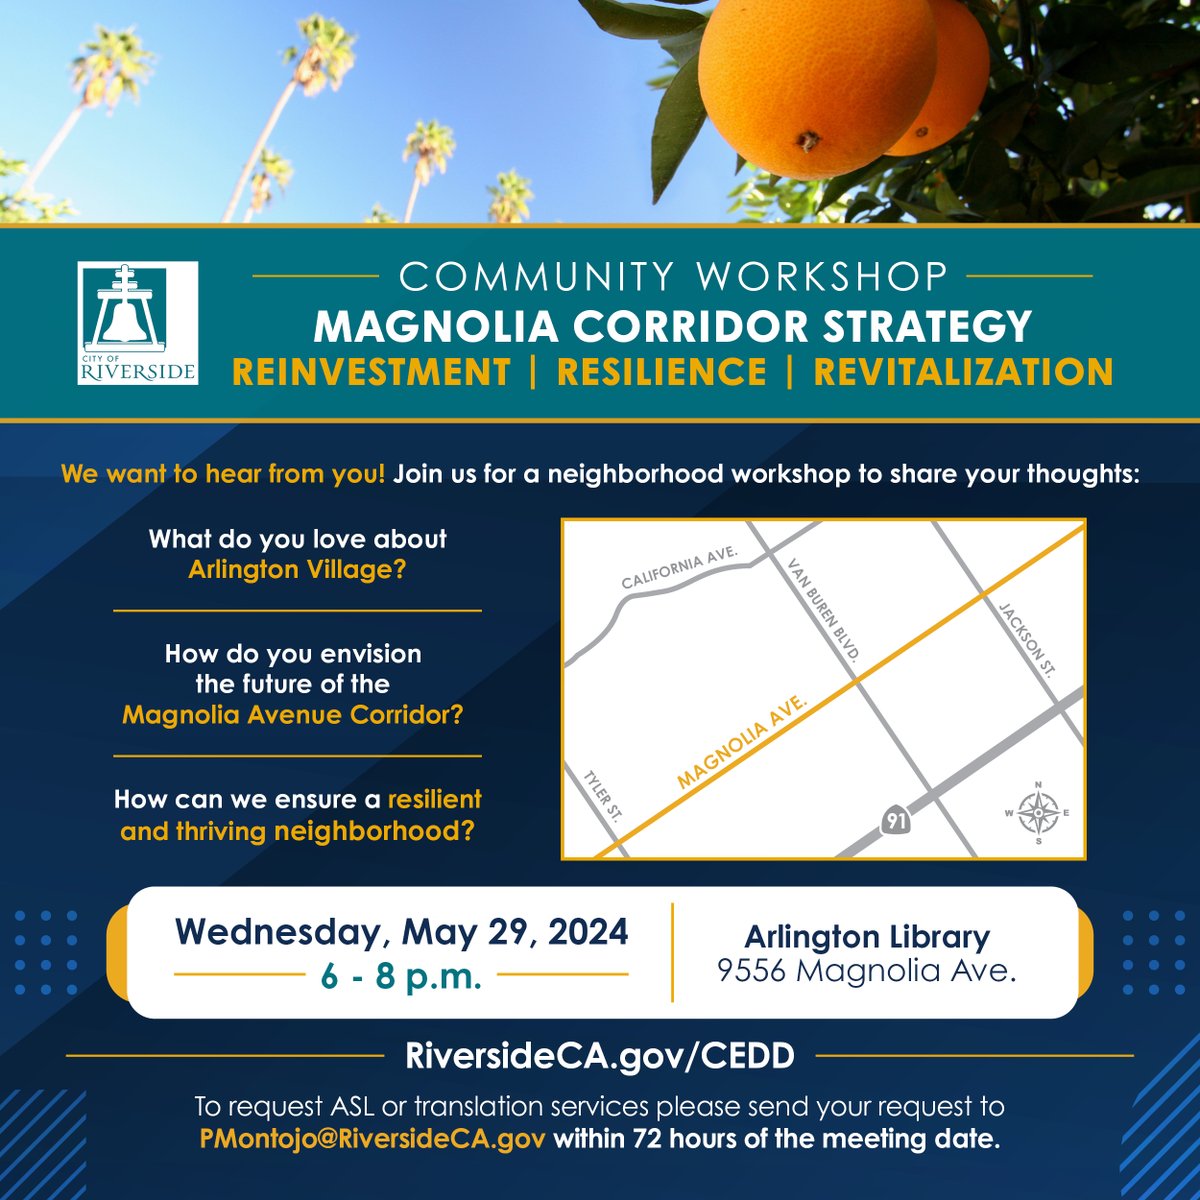 RIVERSIDE: We want to hear from you! Join us for a neighborhood workshop to share your thoughts on Arlington Village & the future of the Magnolia Avenue Corridor: 📅: Wednesday, May 29 📍: Arlington Library (9556 Magnolia Ave.) ⏰: 6:00 pm